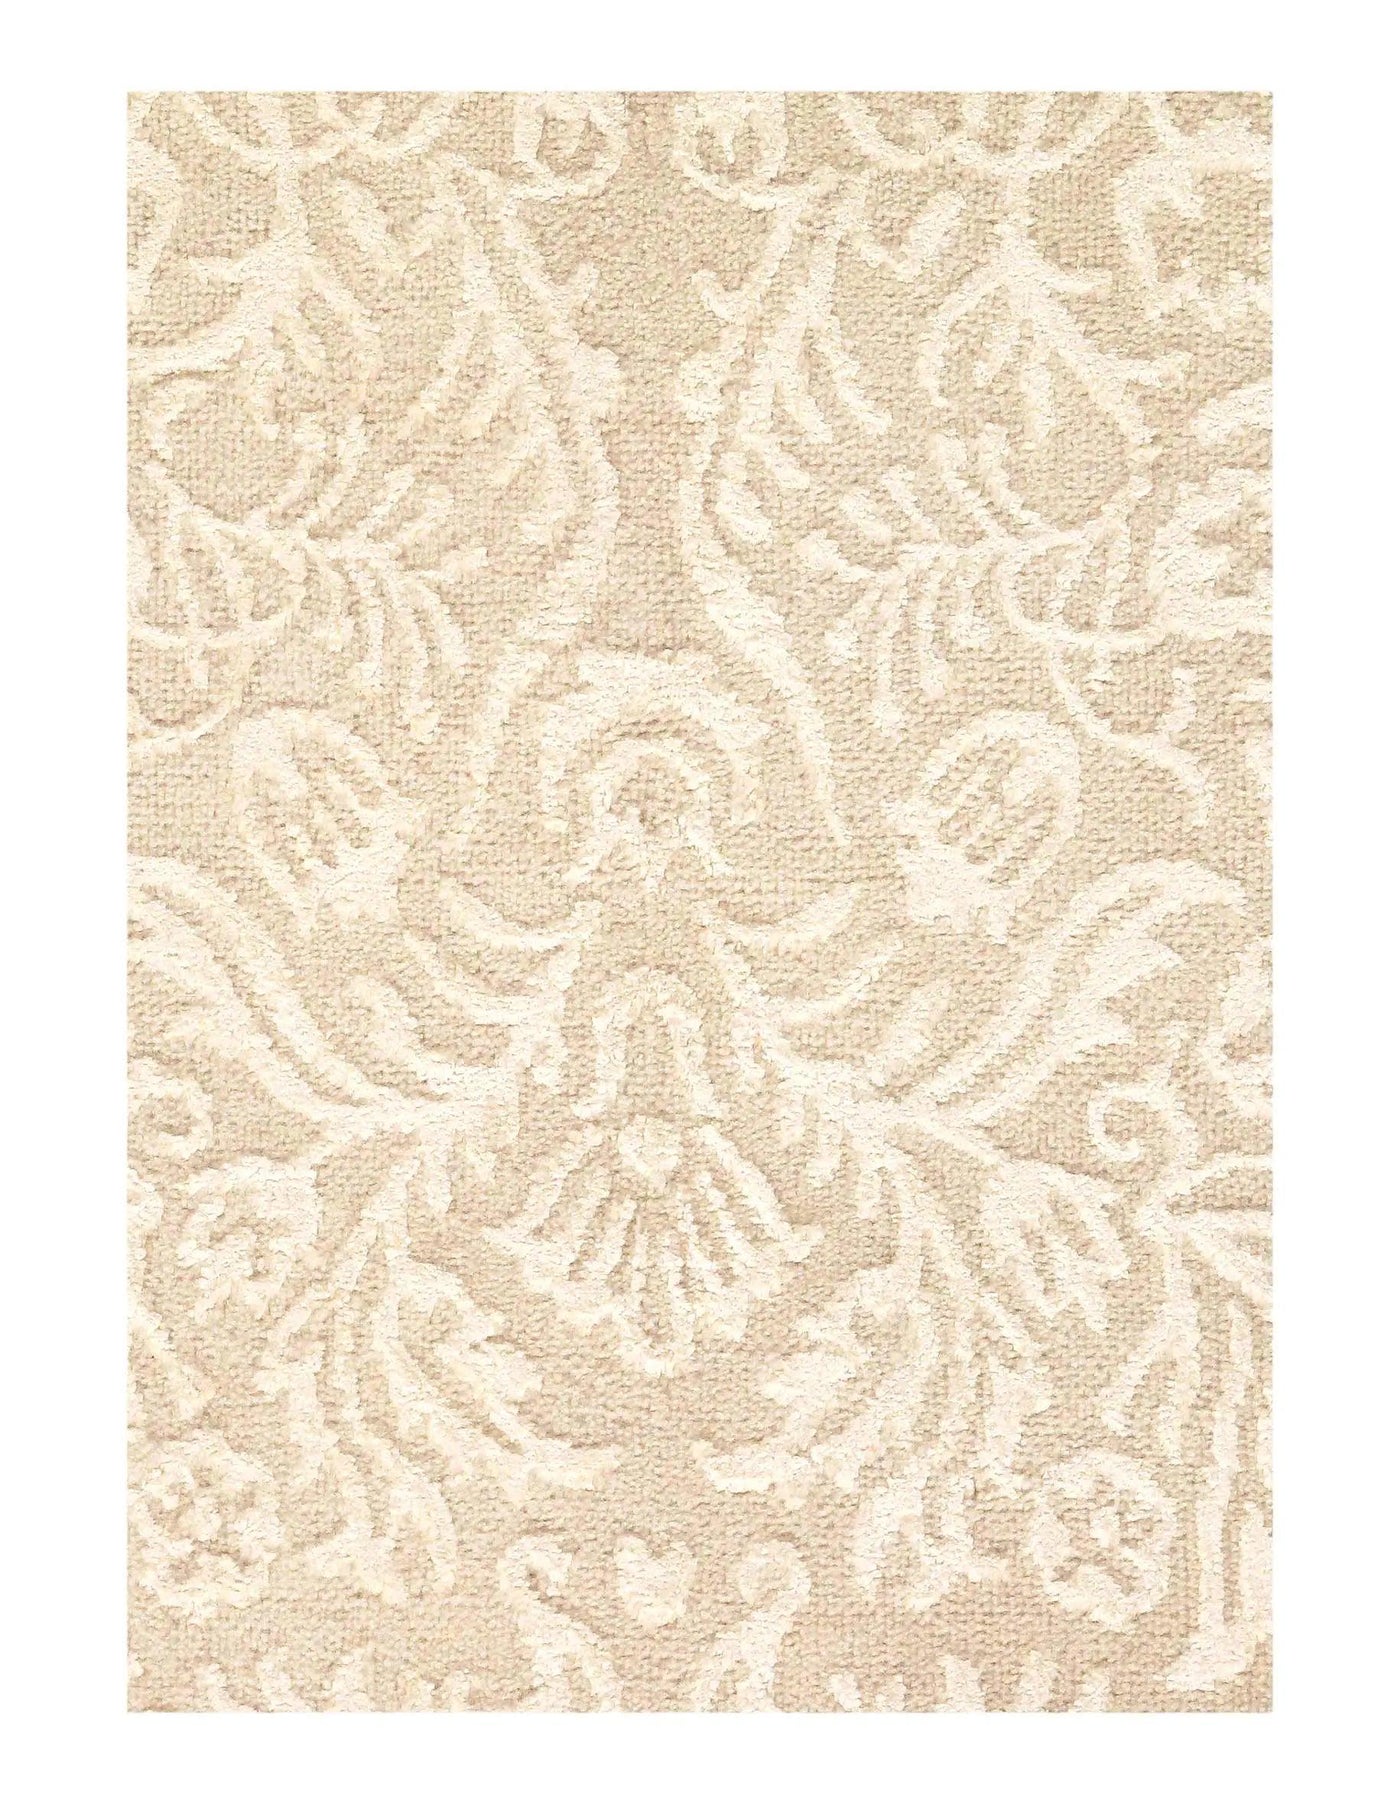 Fine Hand Knotted Silk and Wool Area Rug - 5'6" x 7'11"